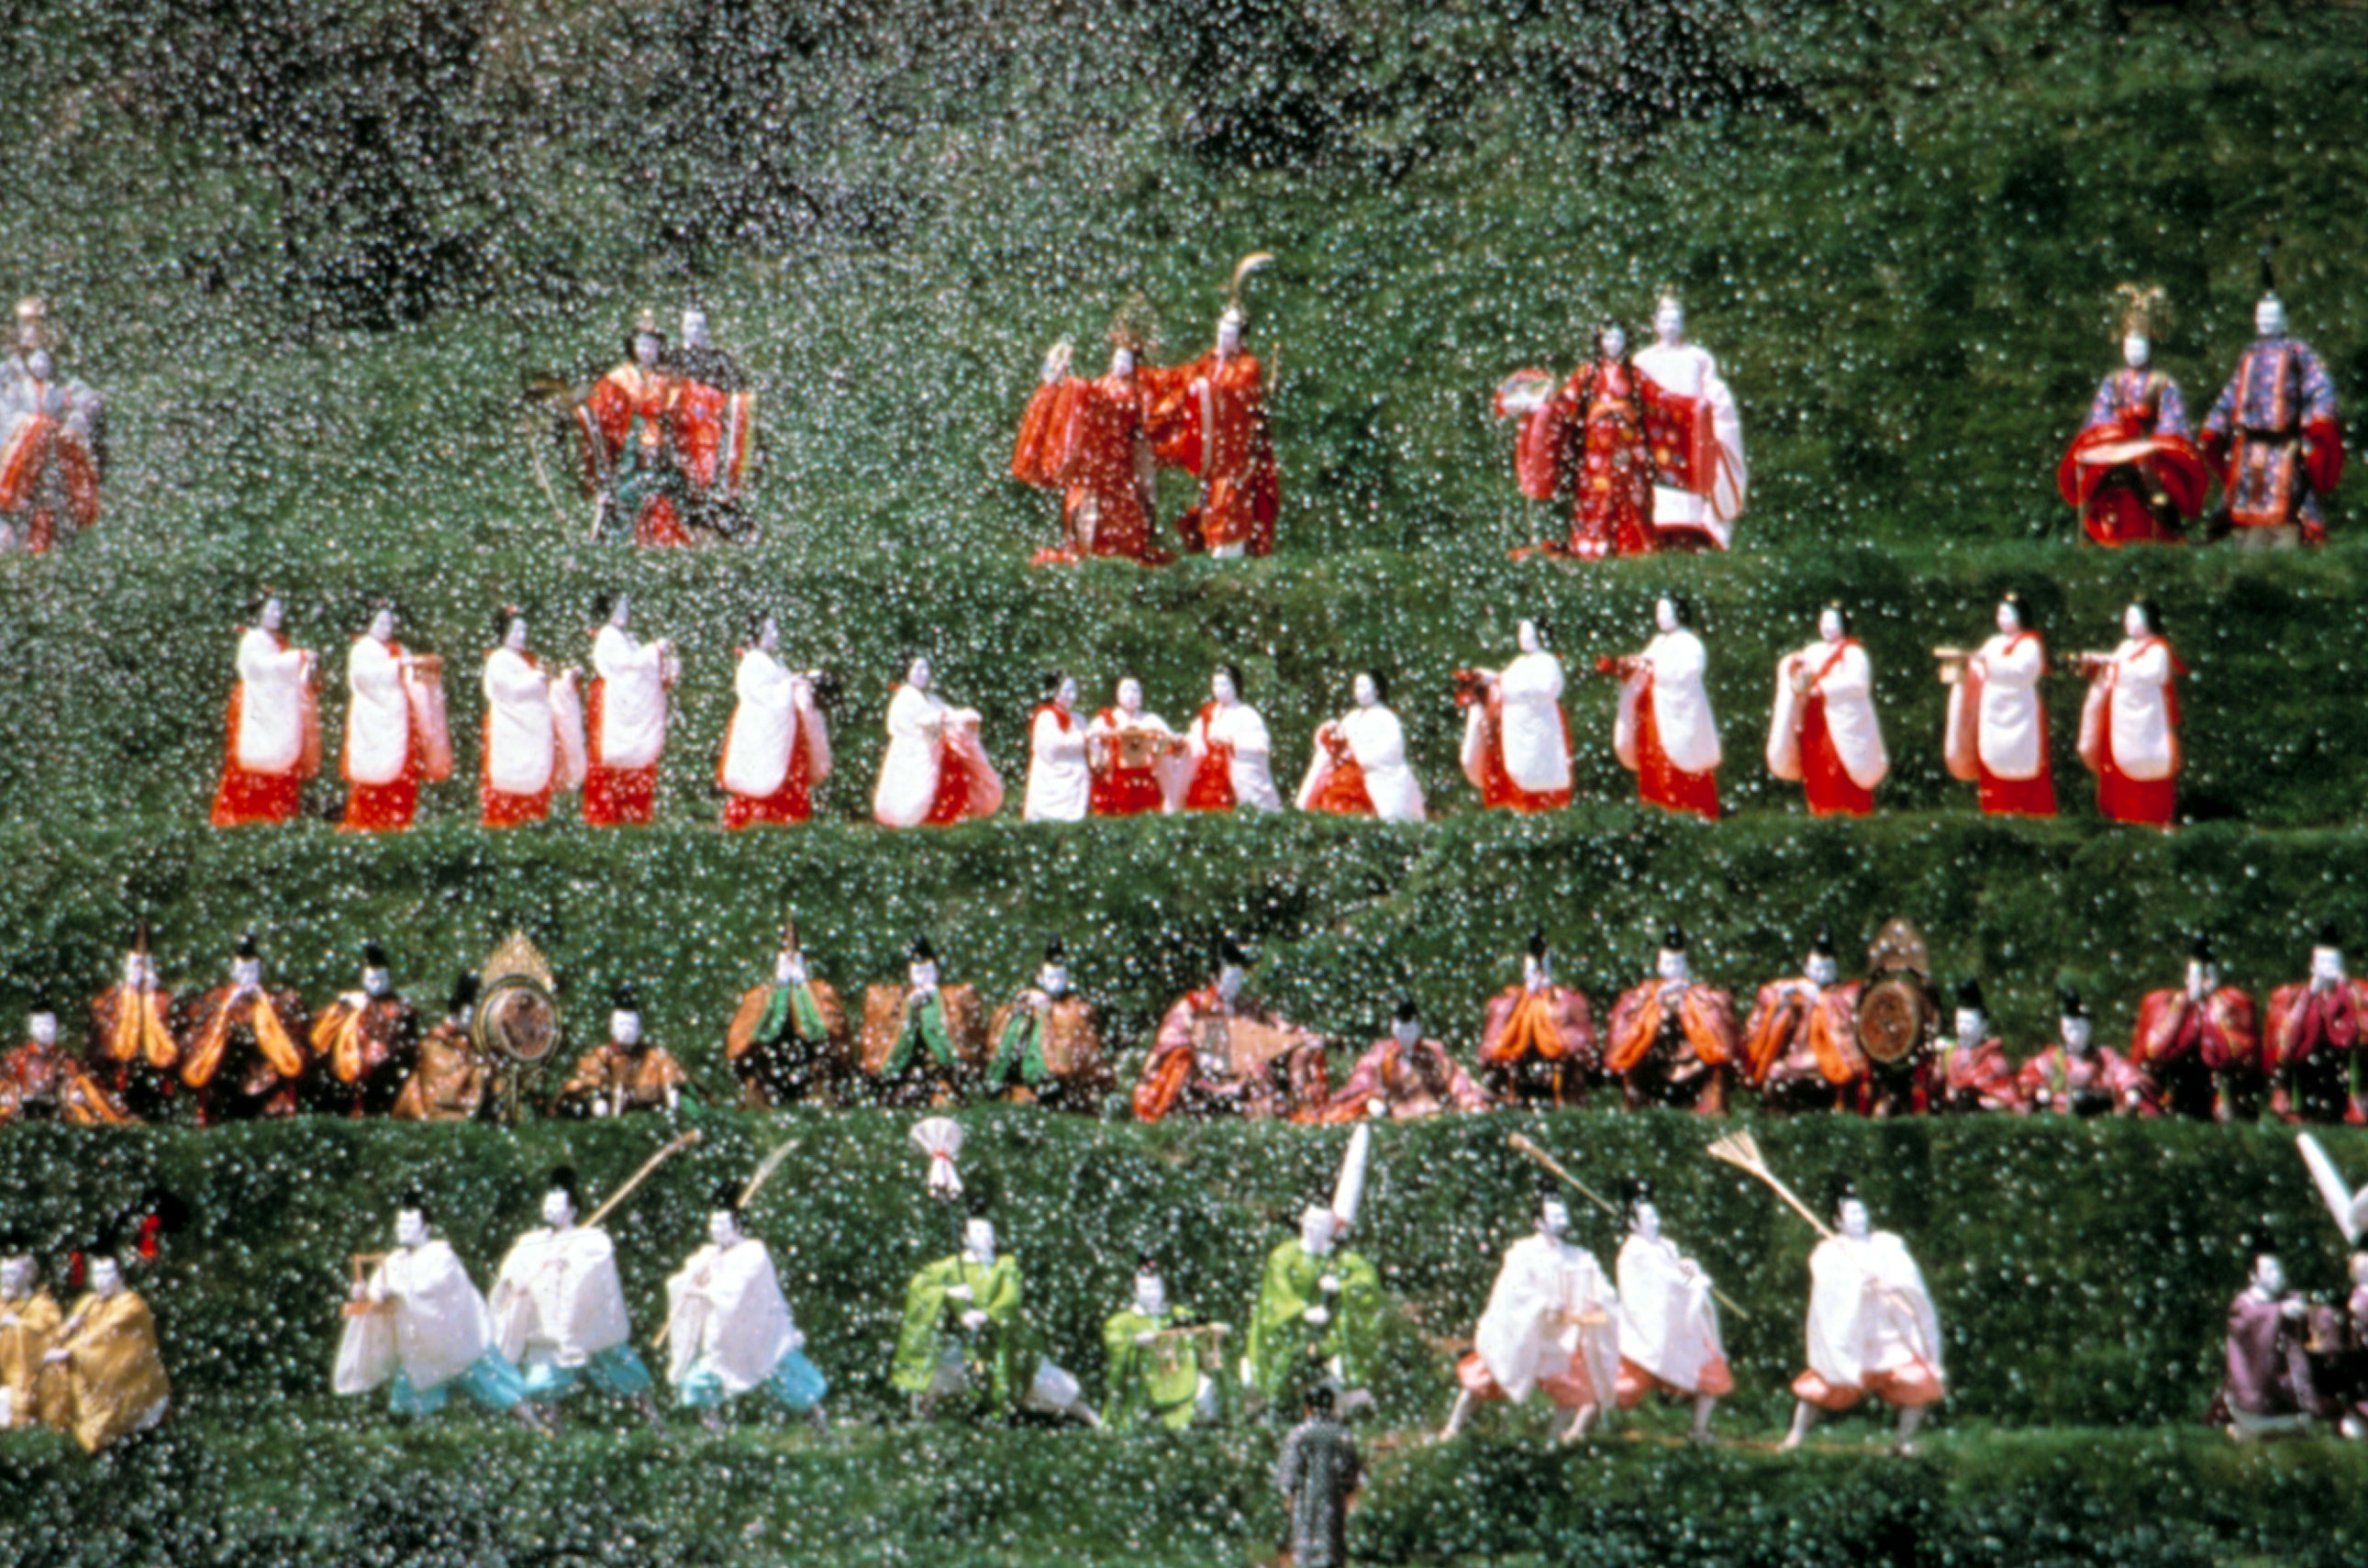 four rows of people in traditional Chinese dress